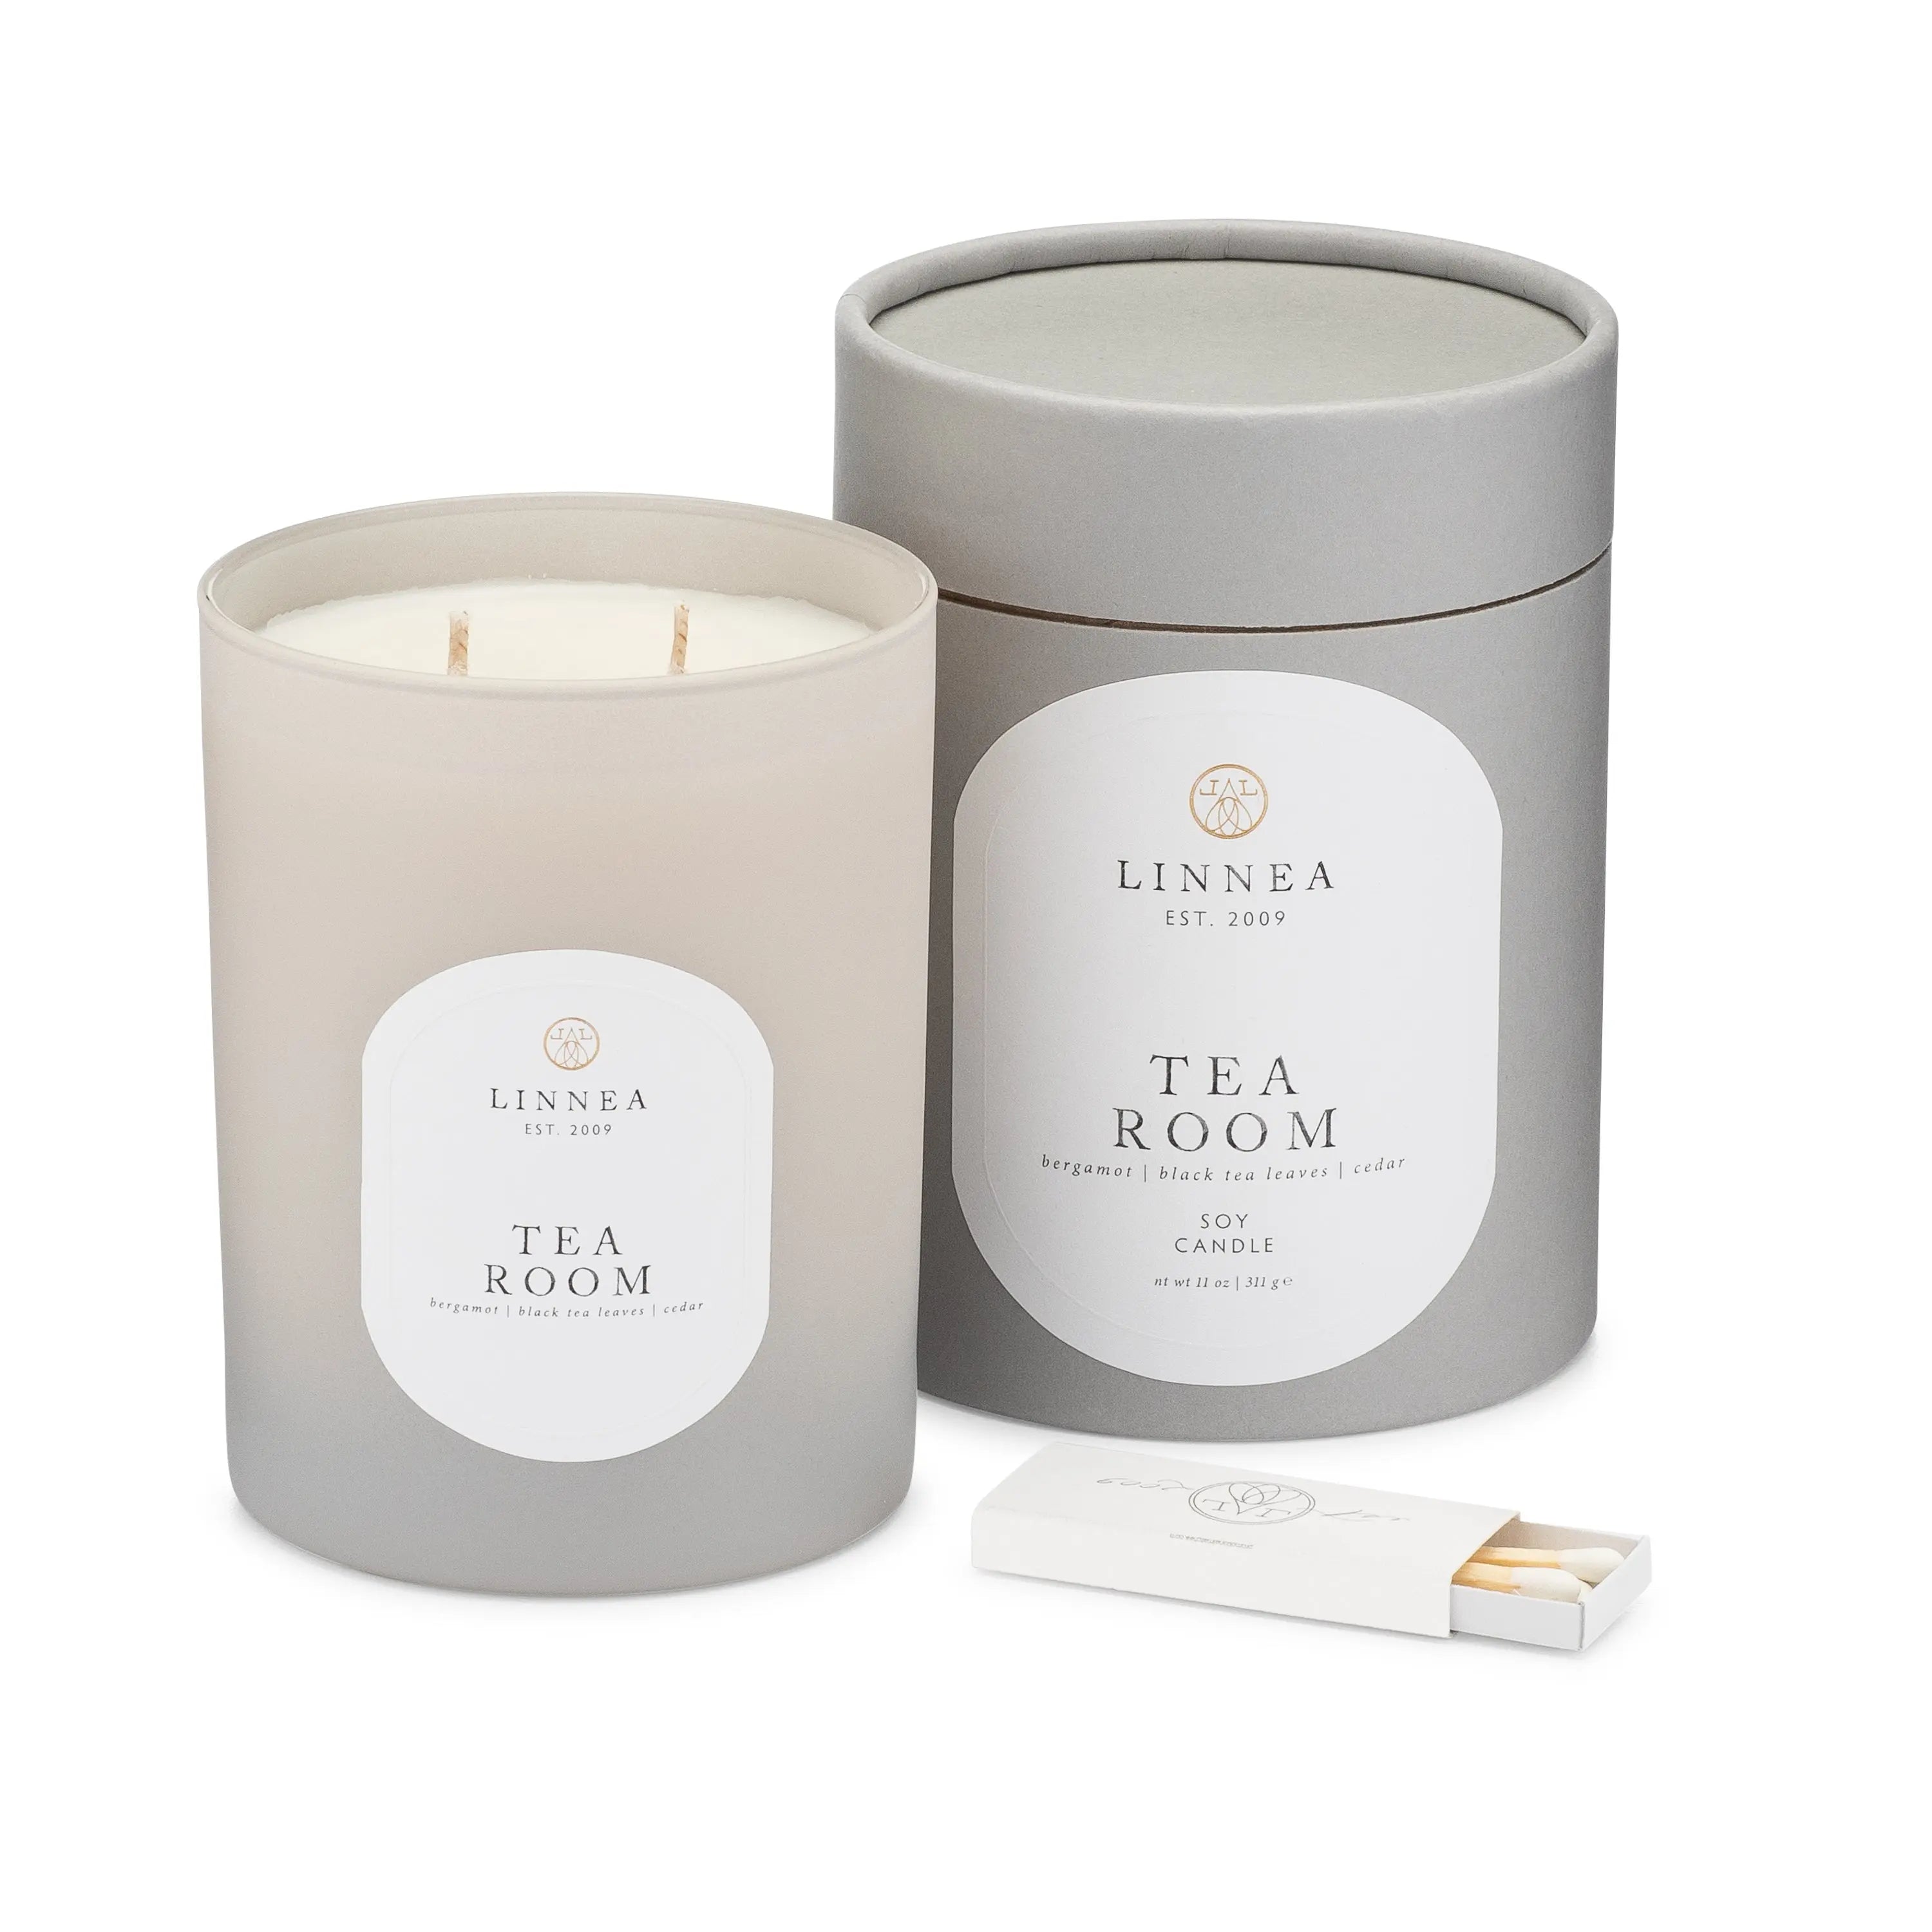 LINNEA Scented Candle in Tea Room - Home Smith